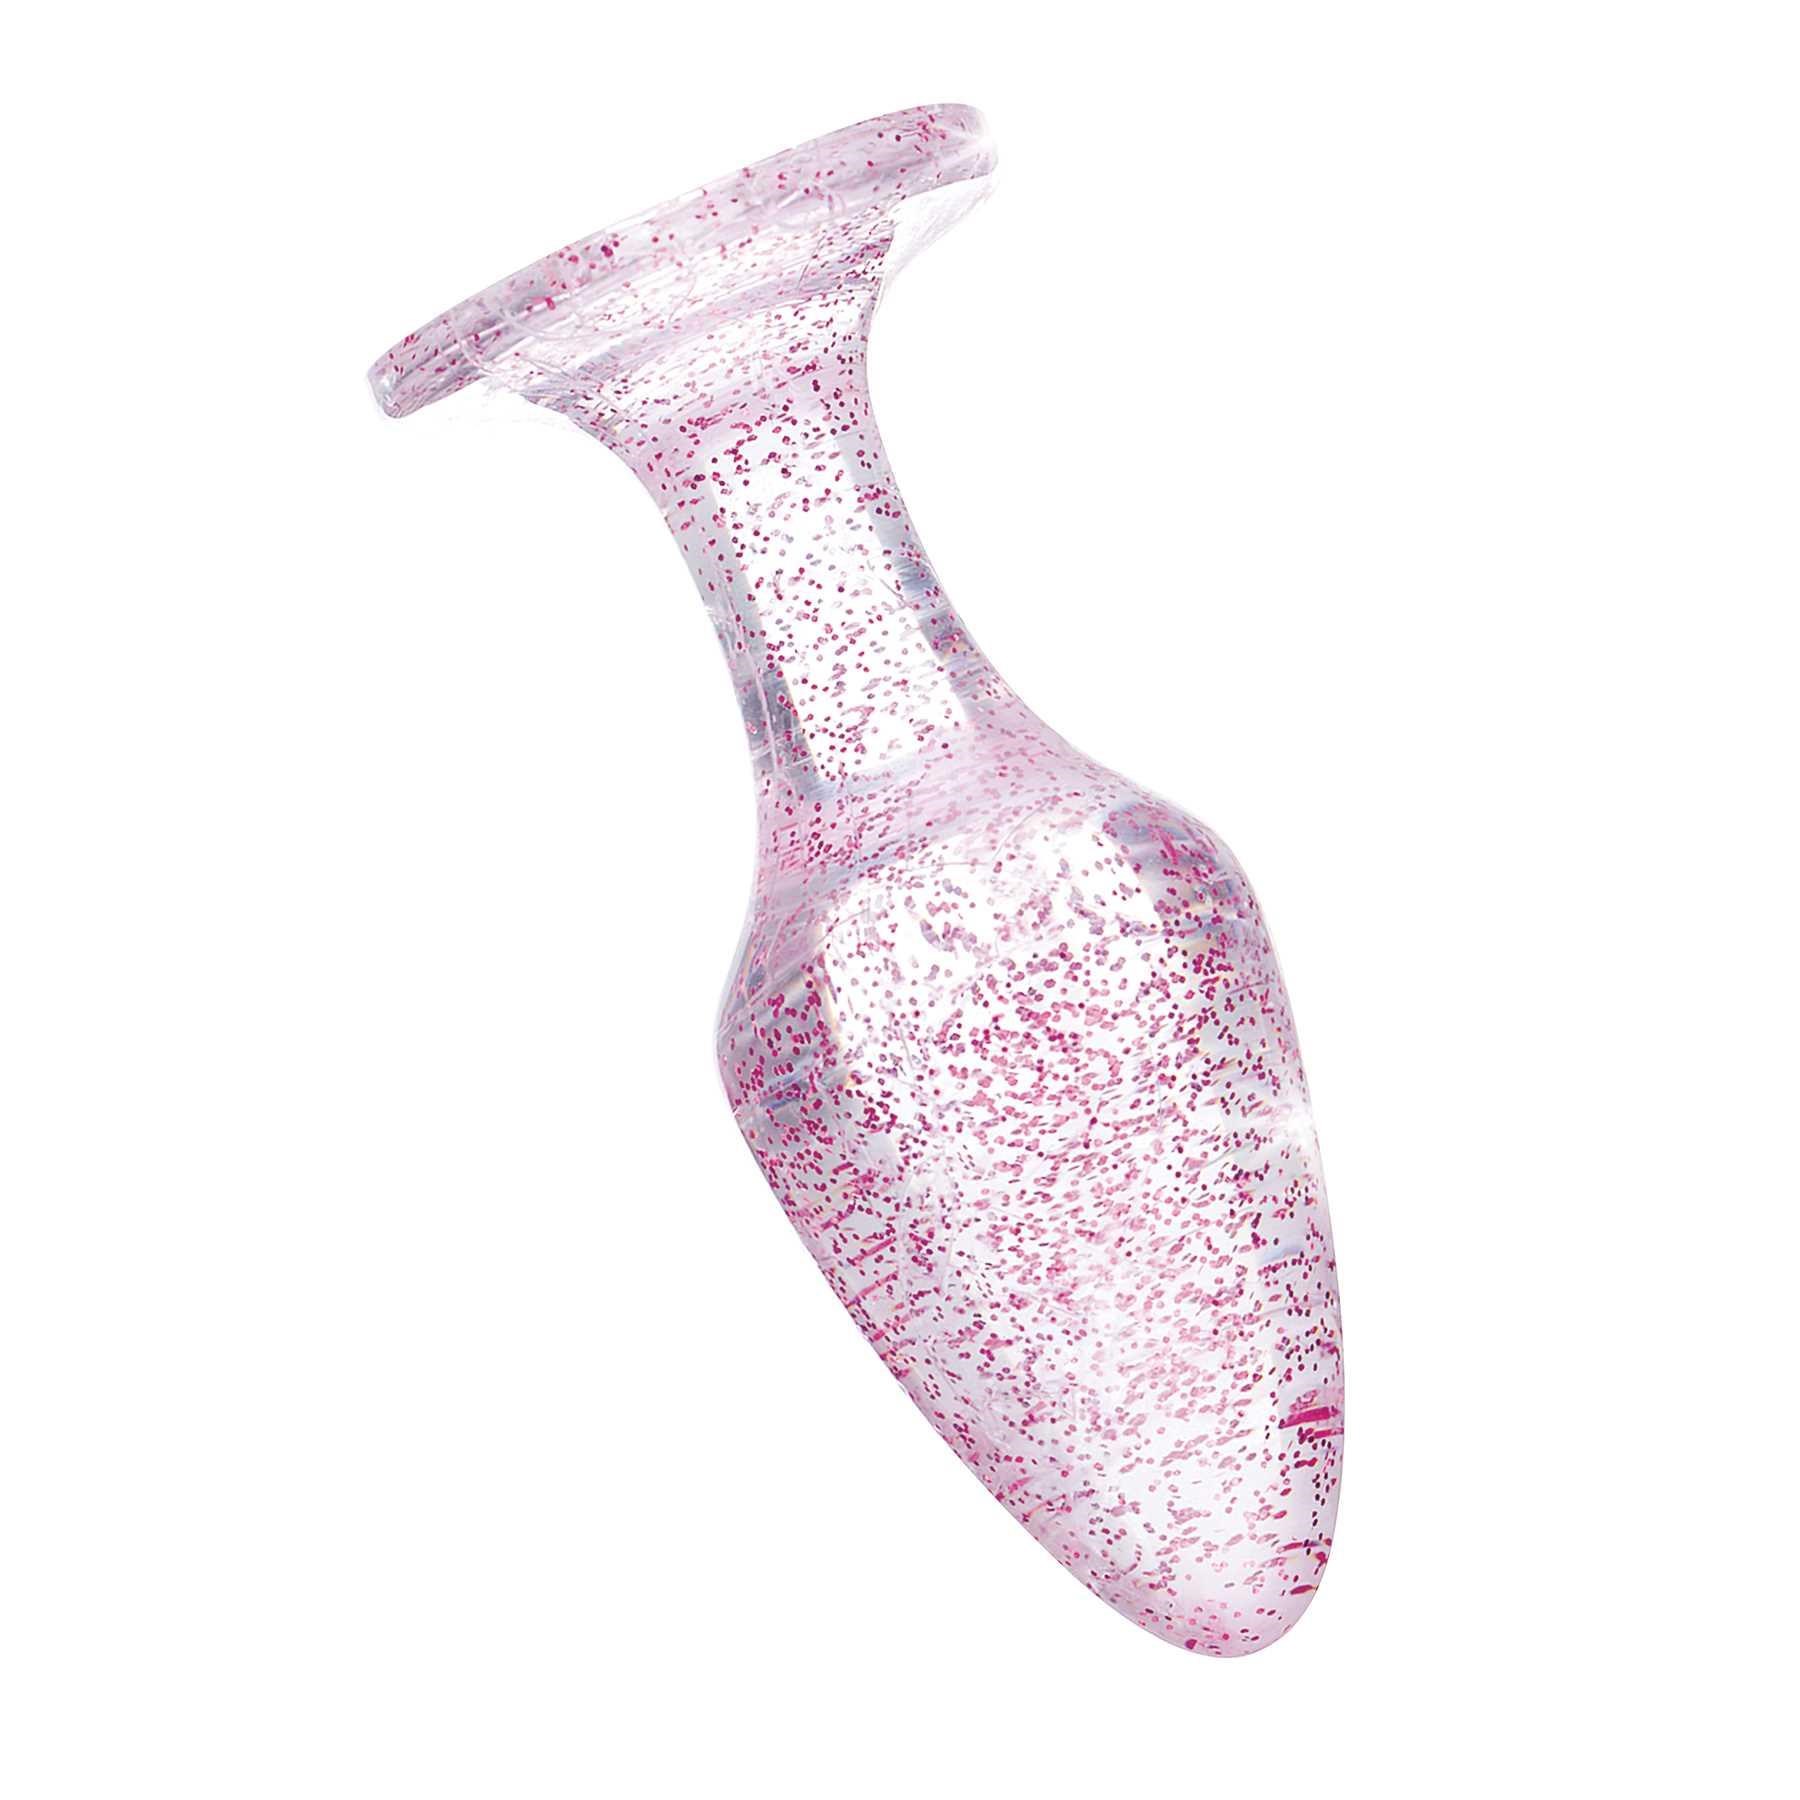 Booty Sparks Pink Glitter Gem Anal Plug Set individual view pink